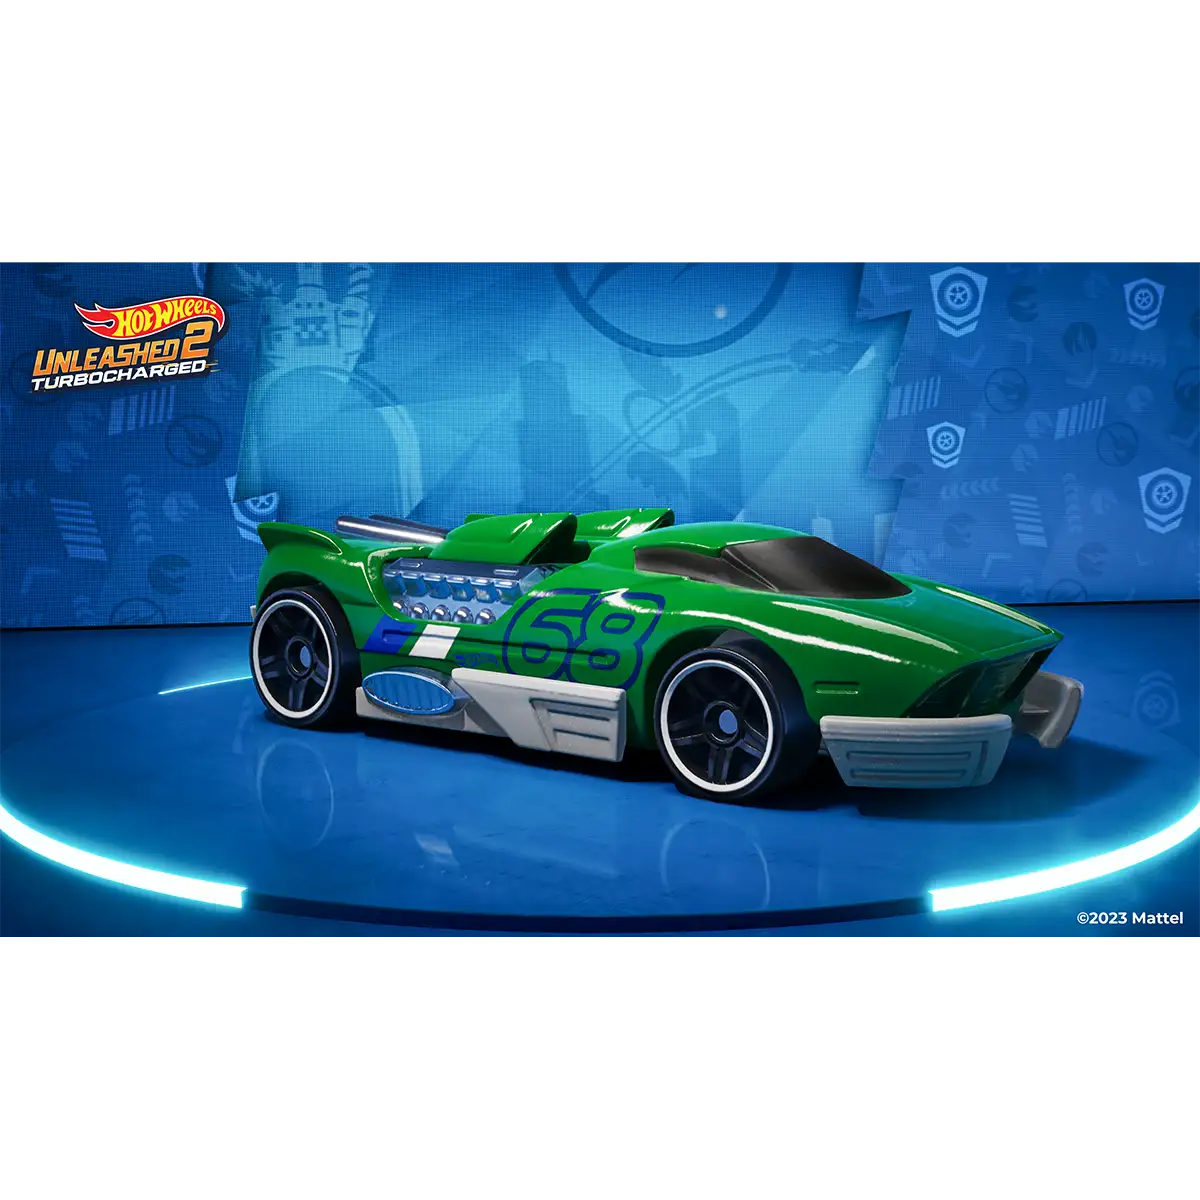 Hot Wheels Unleashed 2 Turbocharged Pure Fire Edition (PS5) Image 12